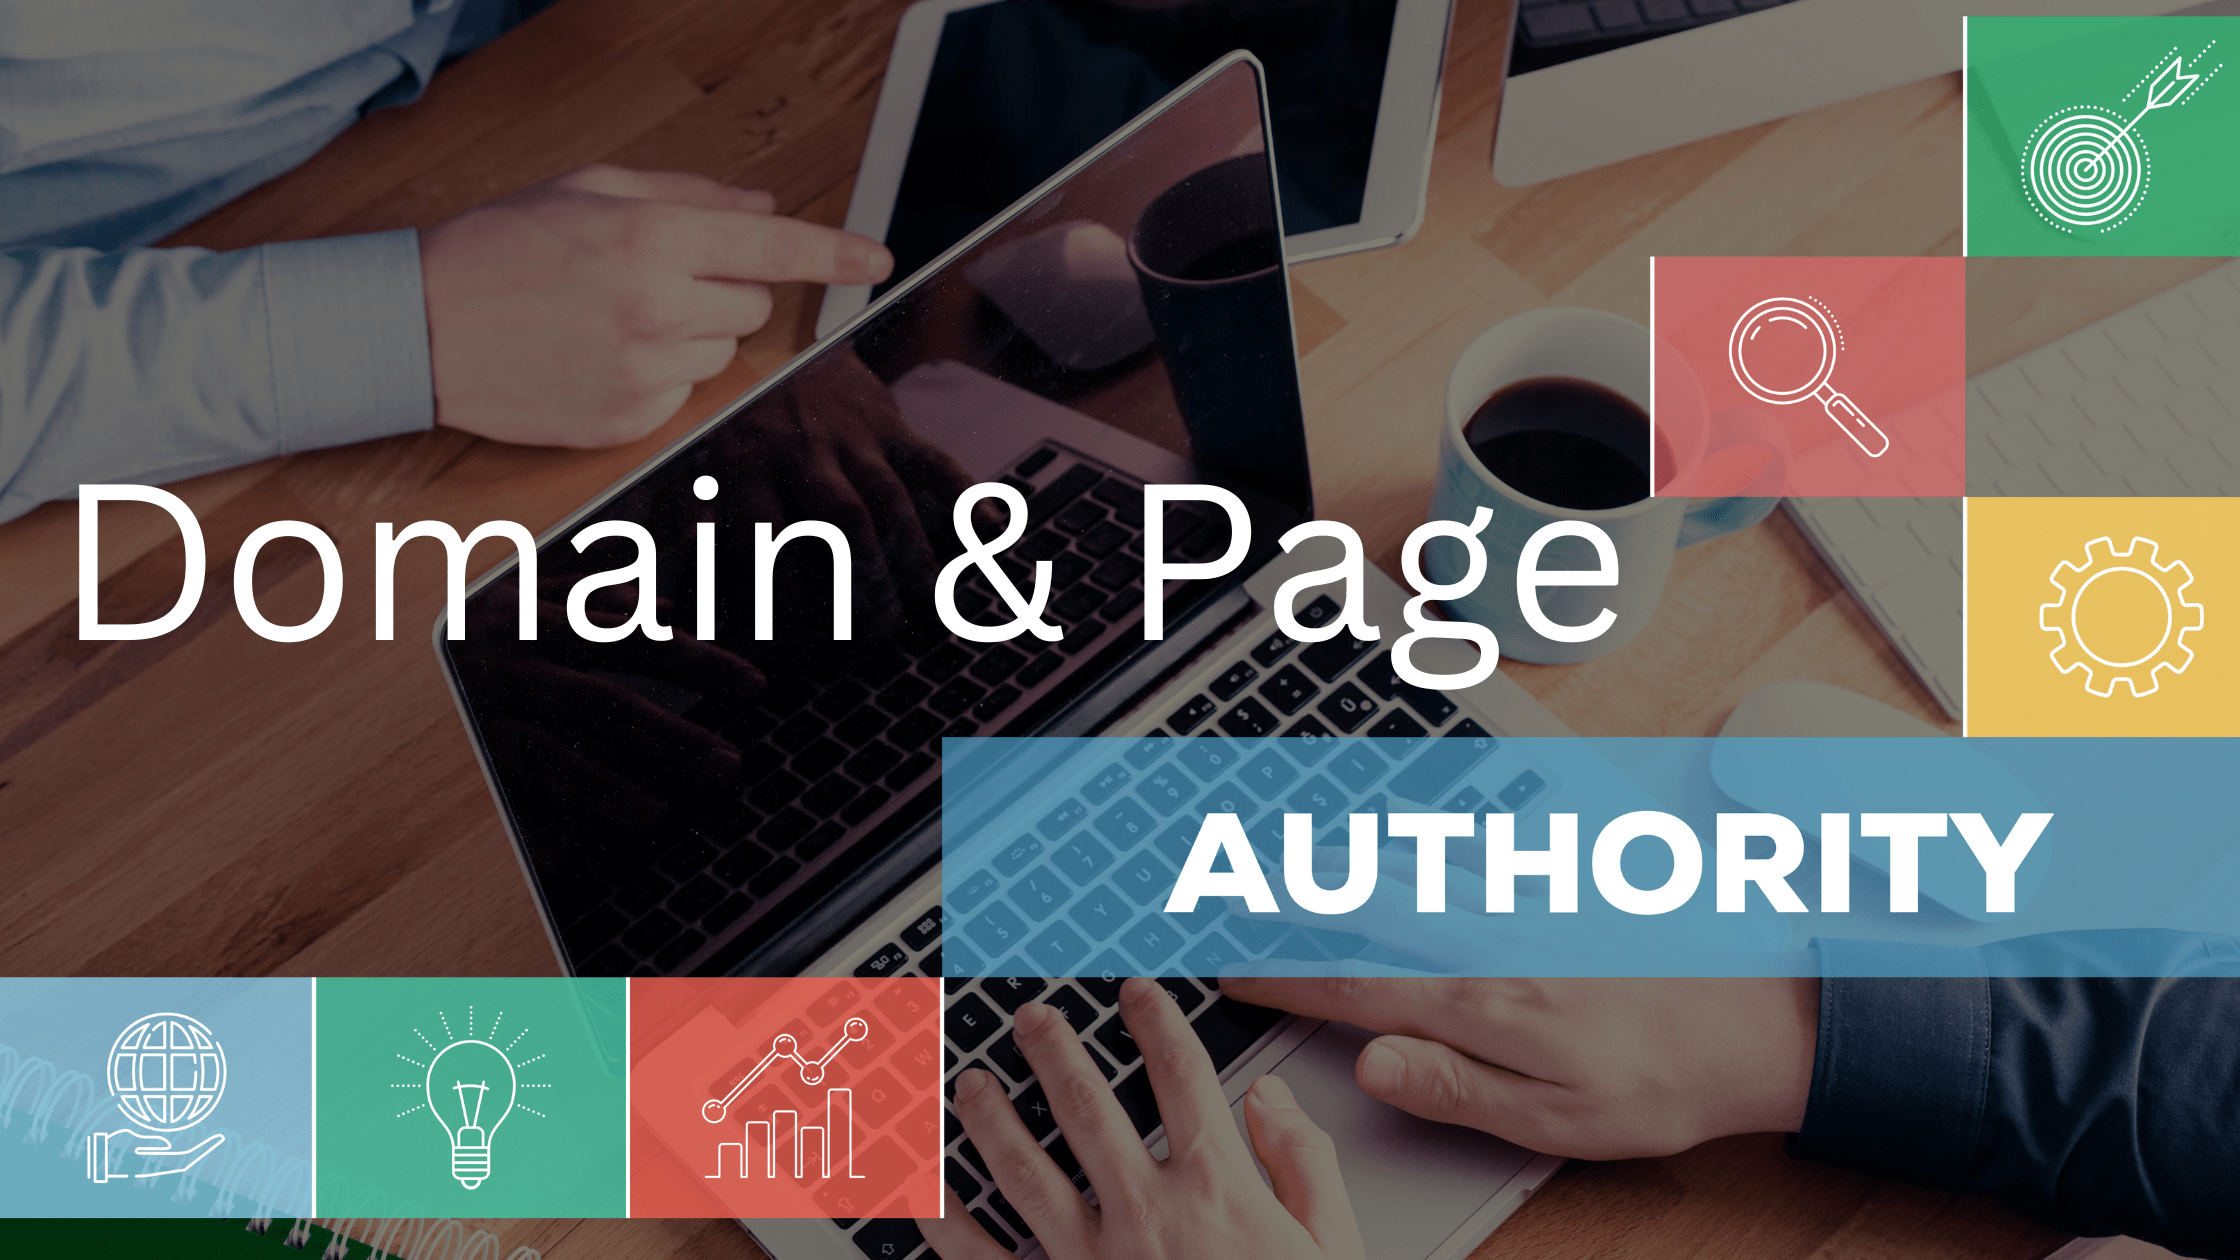 What is Domain Authority and Page Authority in Hindi?